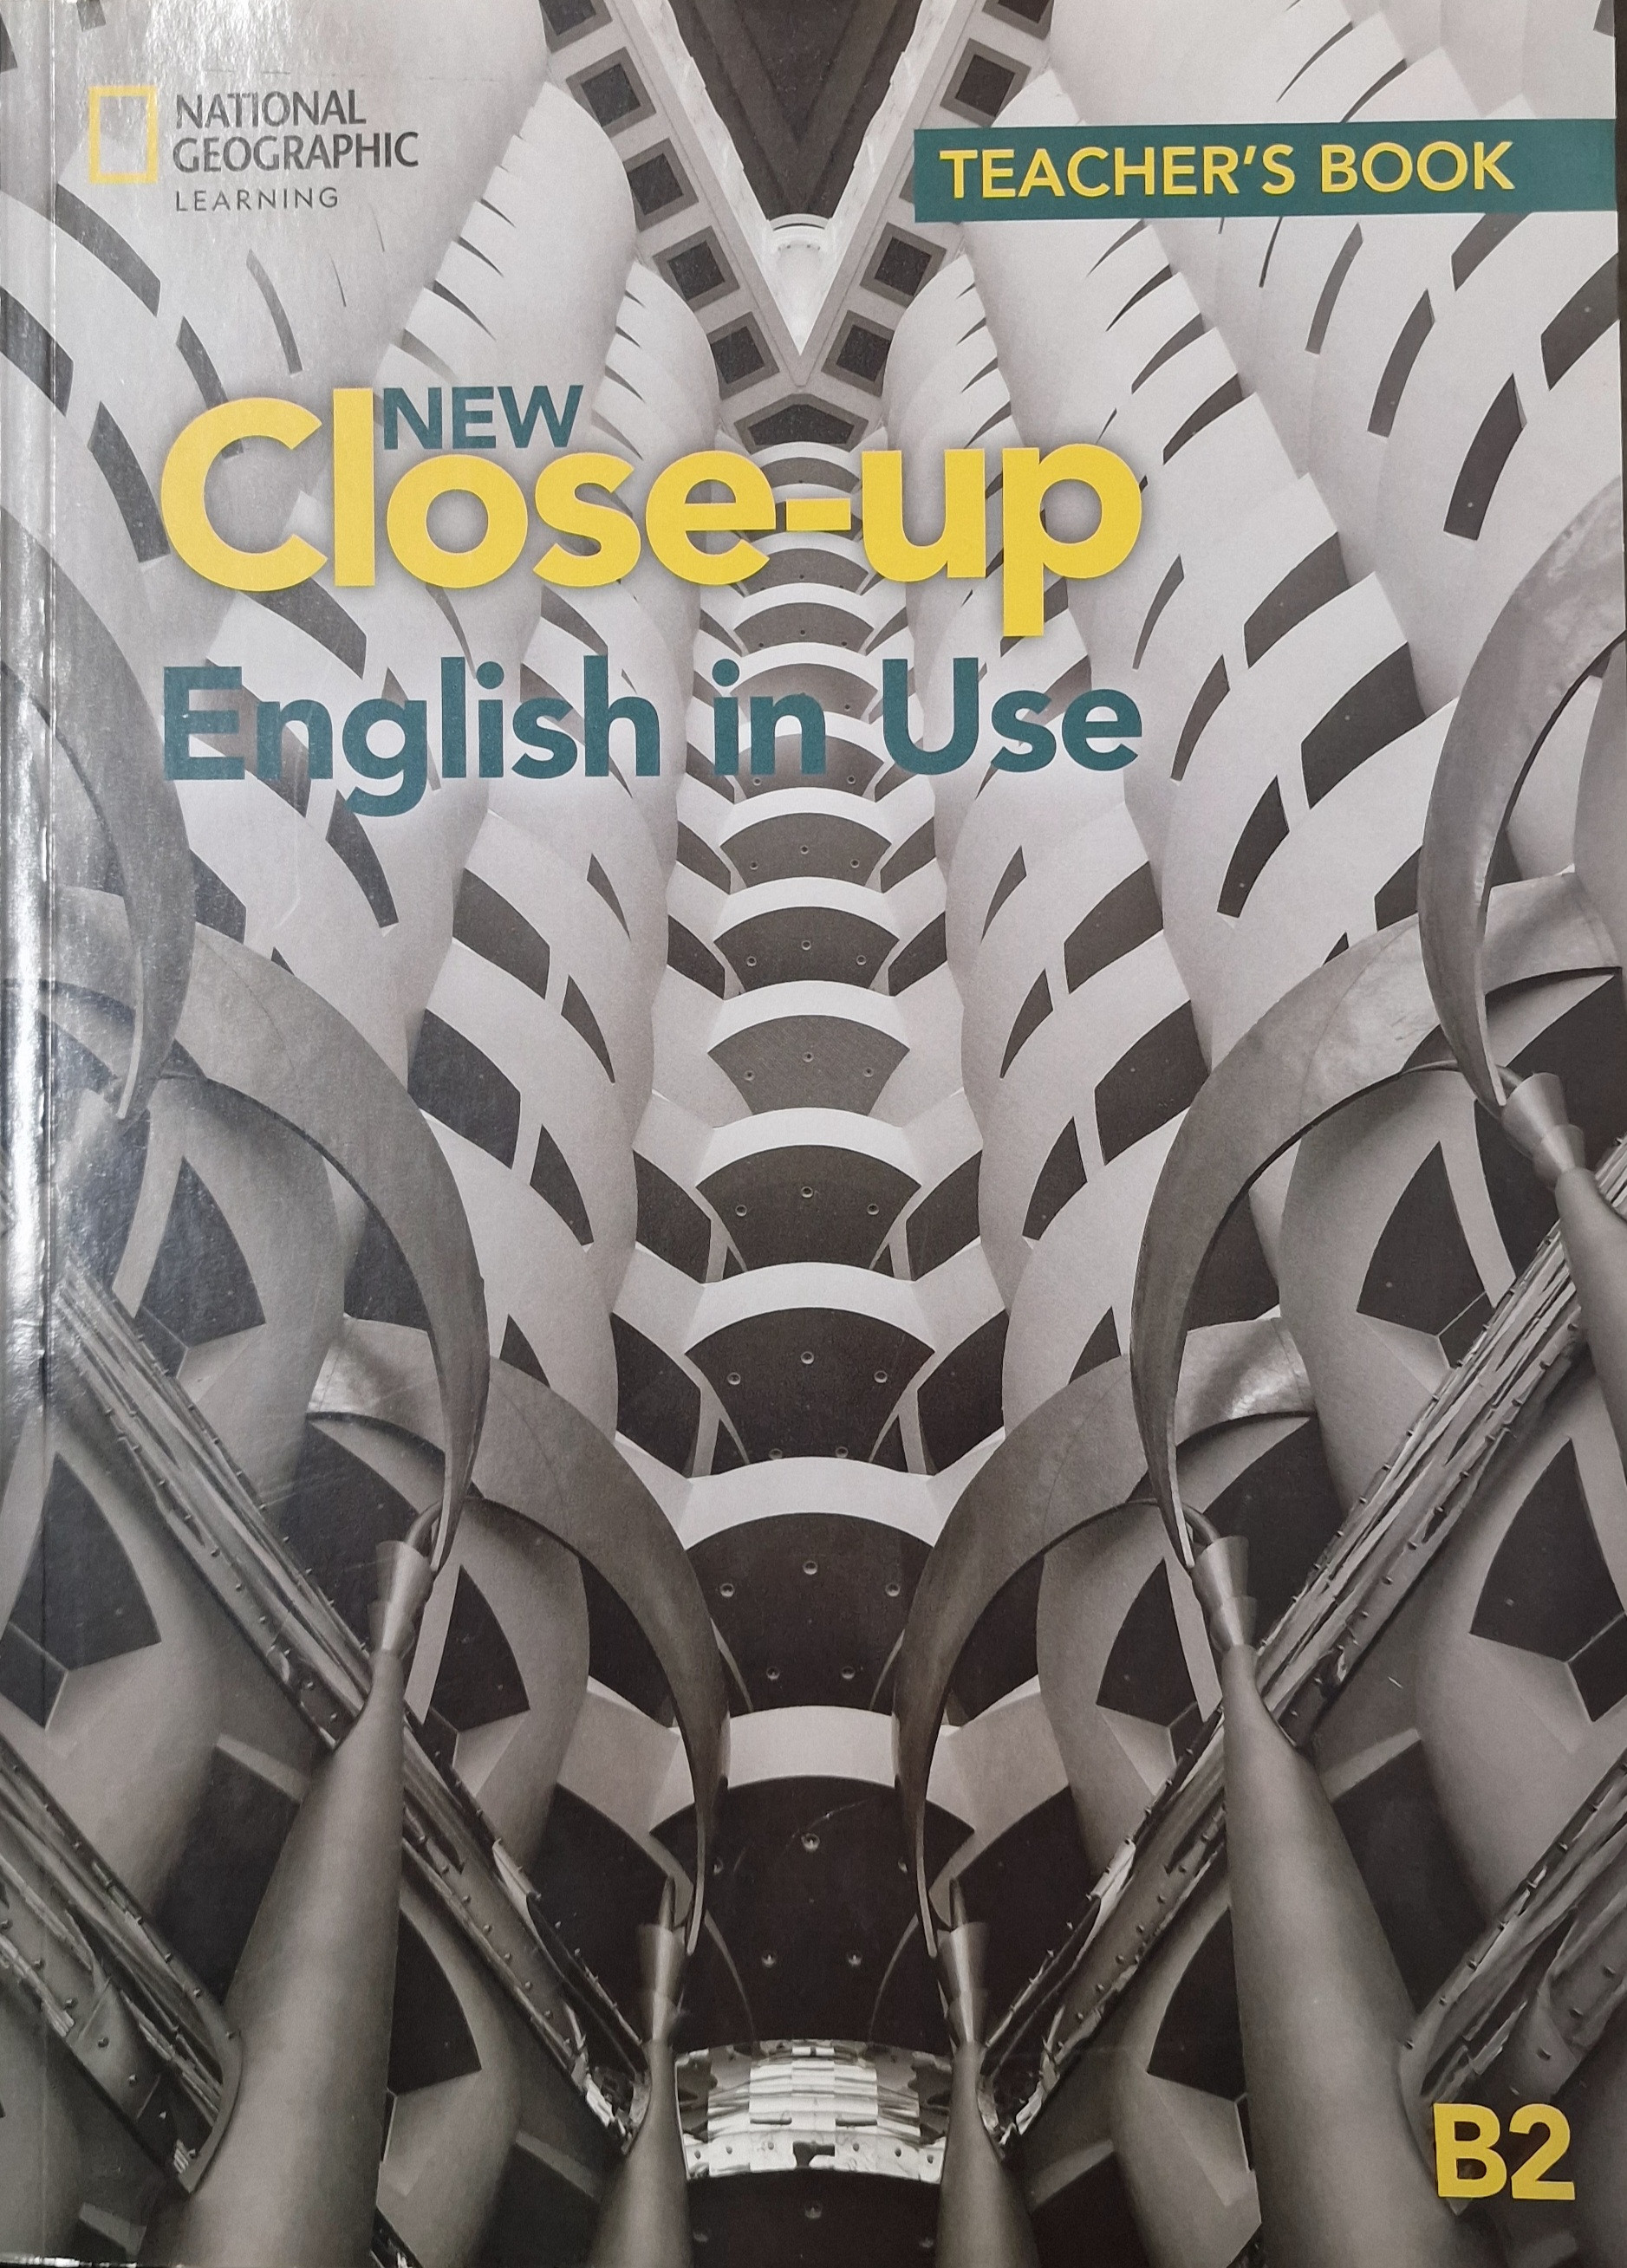 New Close-Up B2 English in Use - Teacher's Book (Γραμματική Καθηγητή)2nd Edition - National Geographic Learning(Cengage)